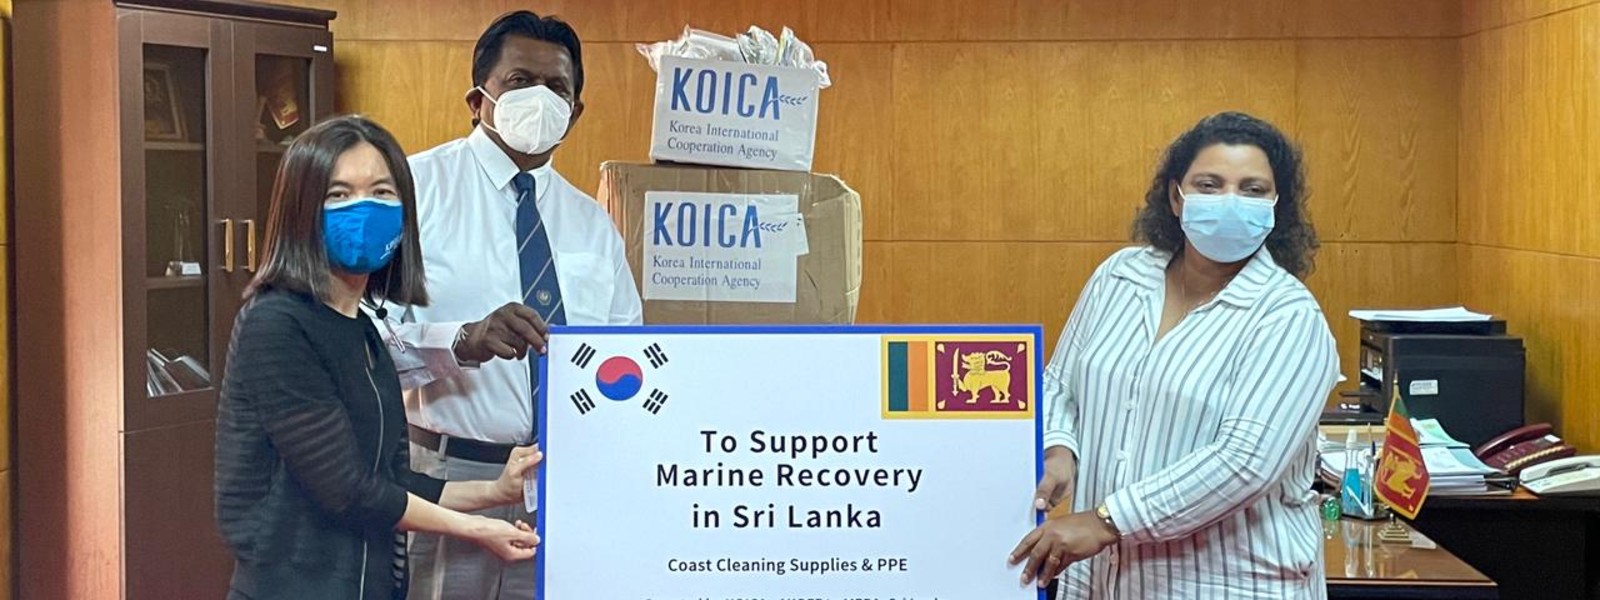 Korea renders support for marine recovery in Sri Lanka